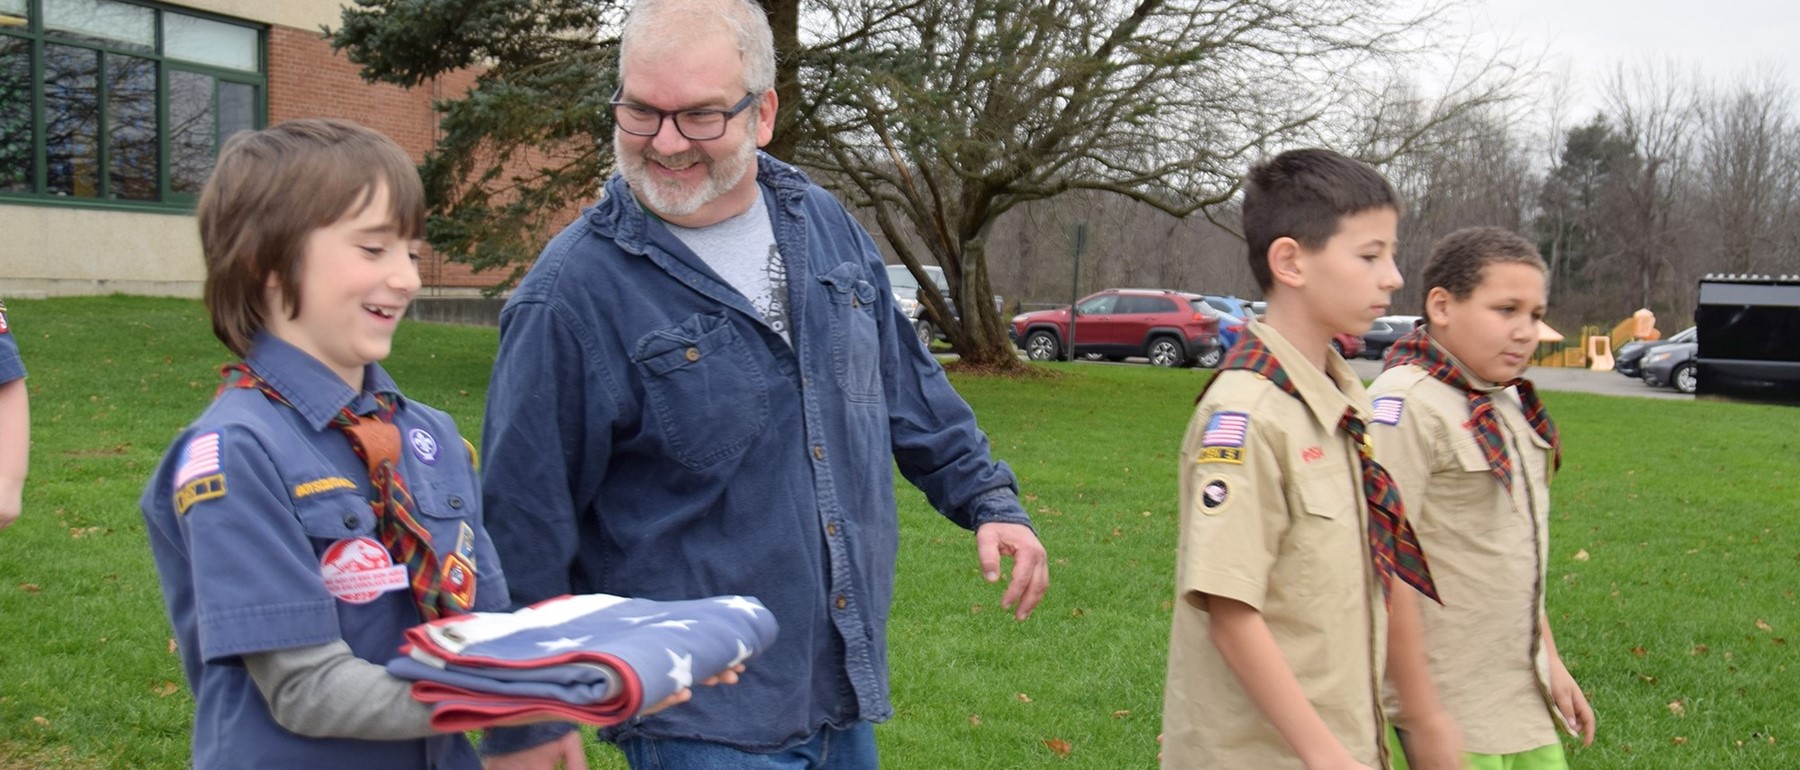 A Tioga Hills Elementary student wearing his Cub Scout uniform carries the flag out to the flagpole with Mr. Doolittle, head custodian.